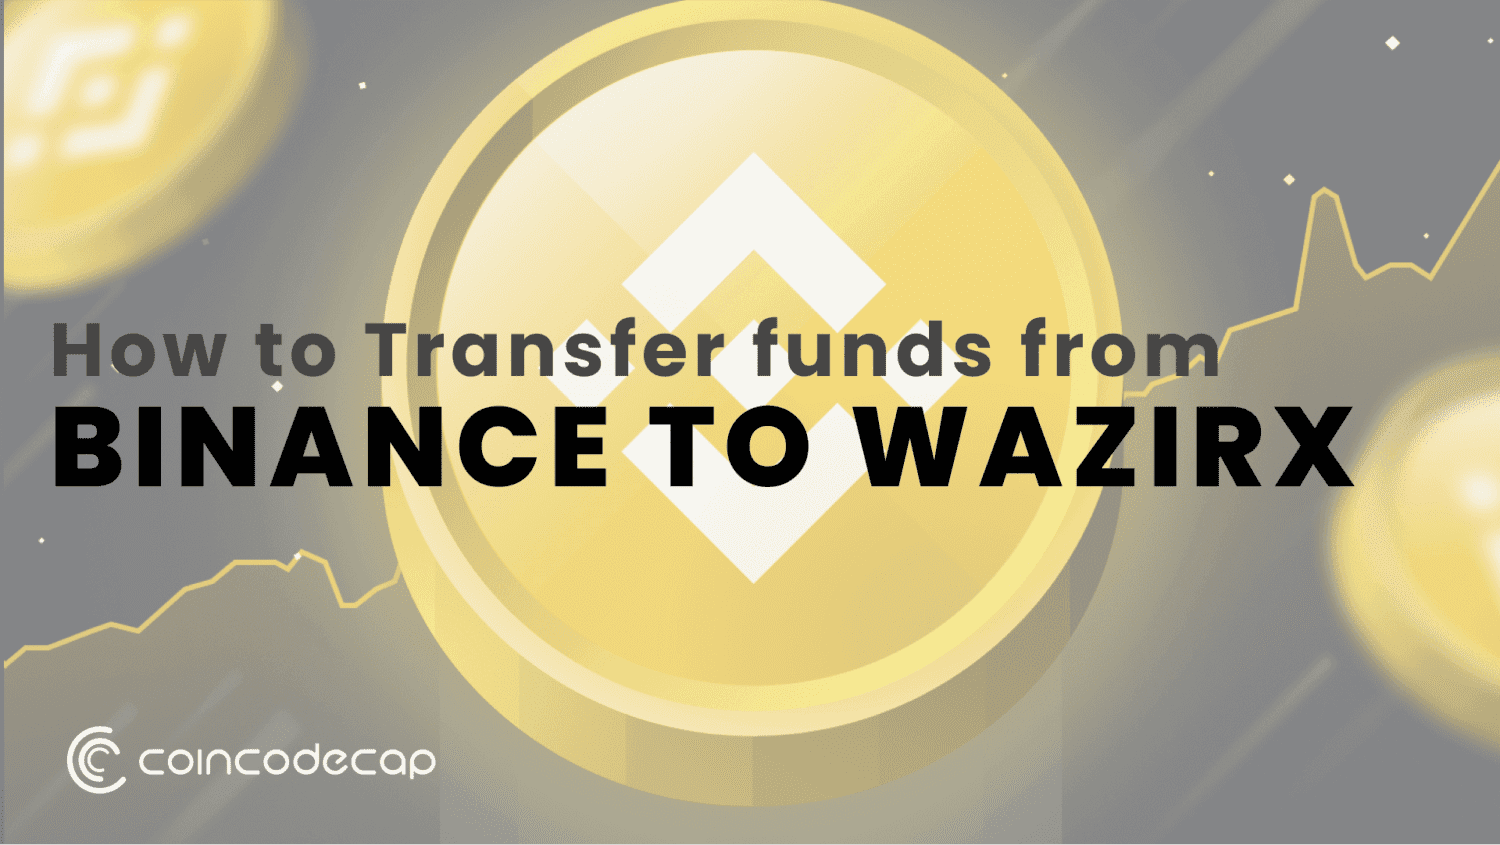 How To Transfer Money From Wazirx To Binance Without Any Fees?